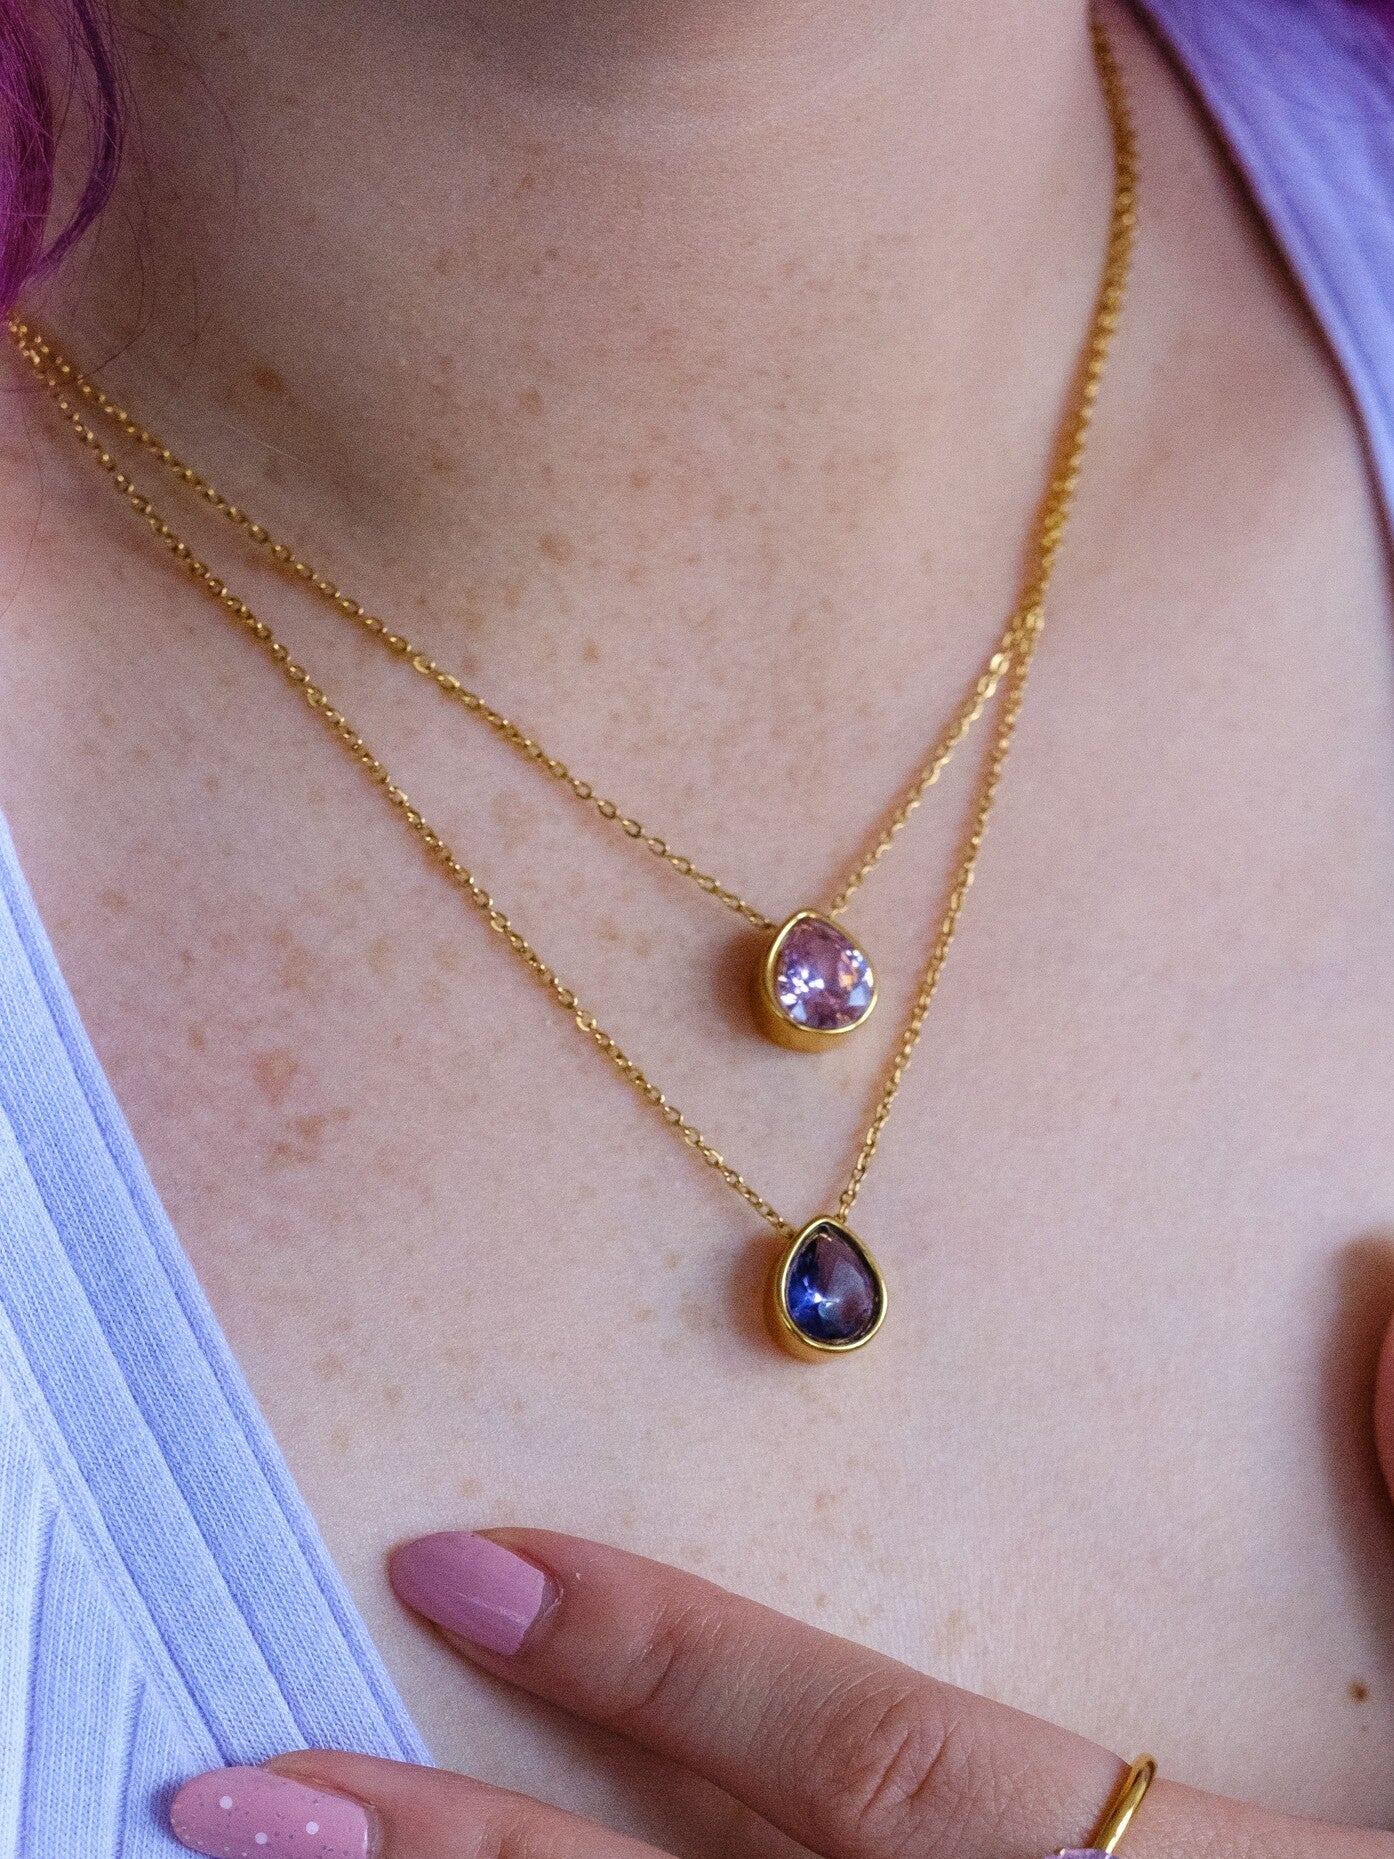 A woman wears to gold necklaces with teardrop pendants. The top pendant is set with a pale pink stone and the lower necklace is set with a purple stone